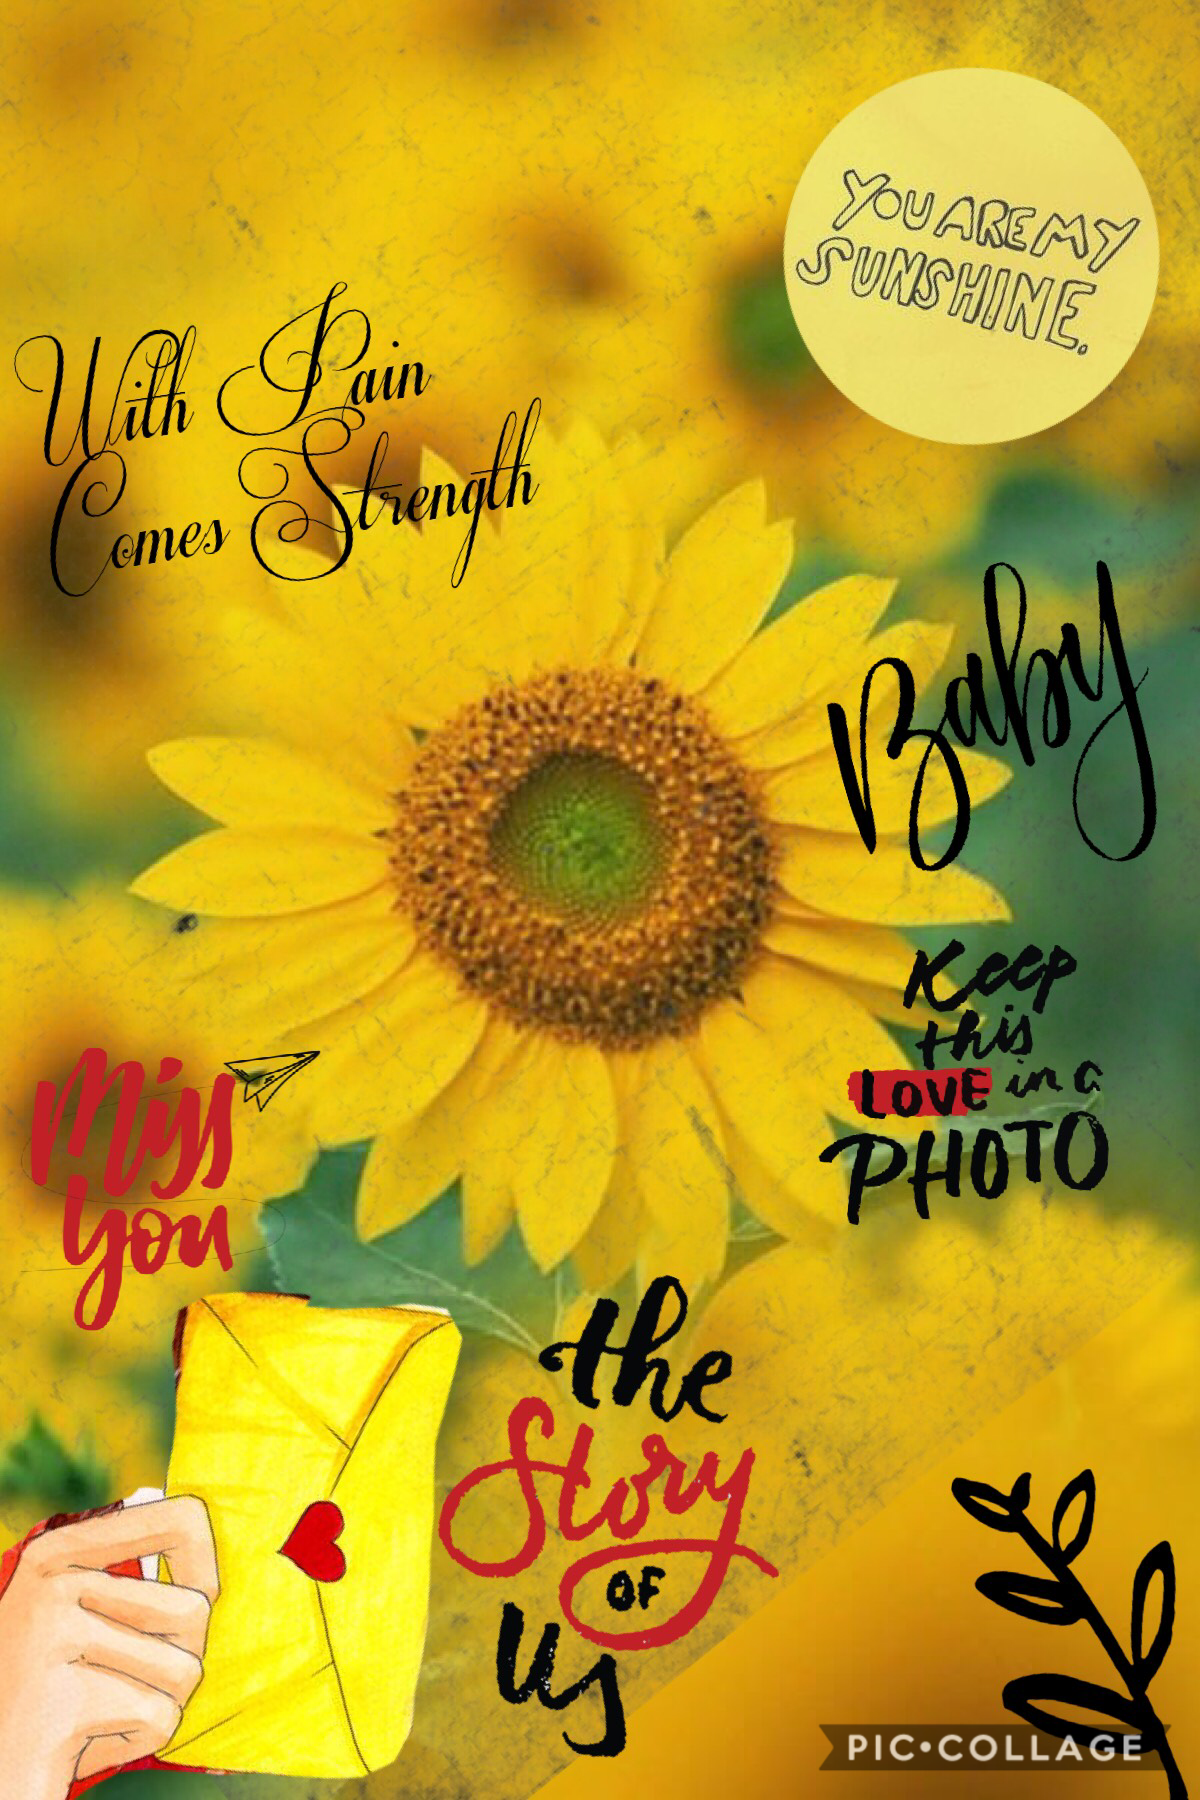 🌻 Tap 🌻 
This one is kind of messy but I hope you like it. Comment a “🌻” if you want a spam and a follow exchange. Keep loving and hopefully you join the sunflower squad! 🍯💛